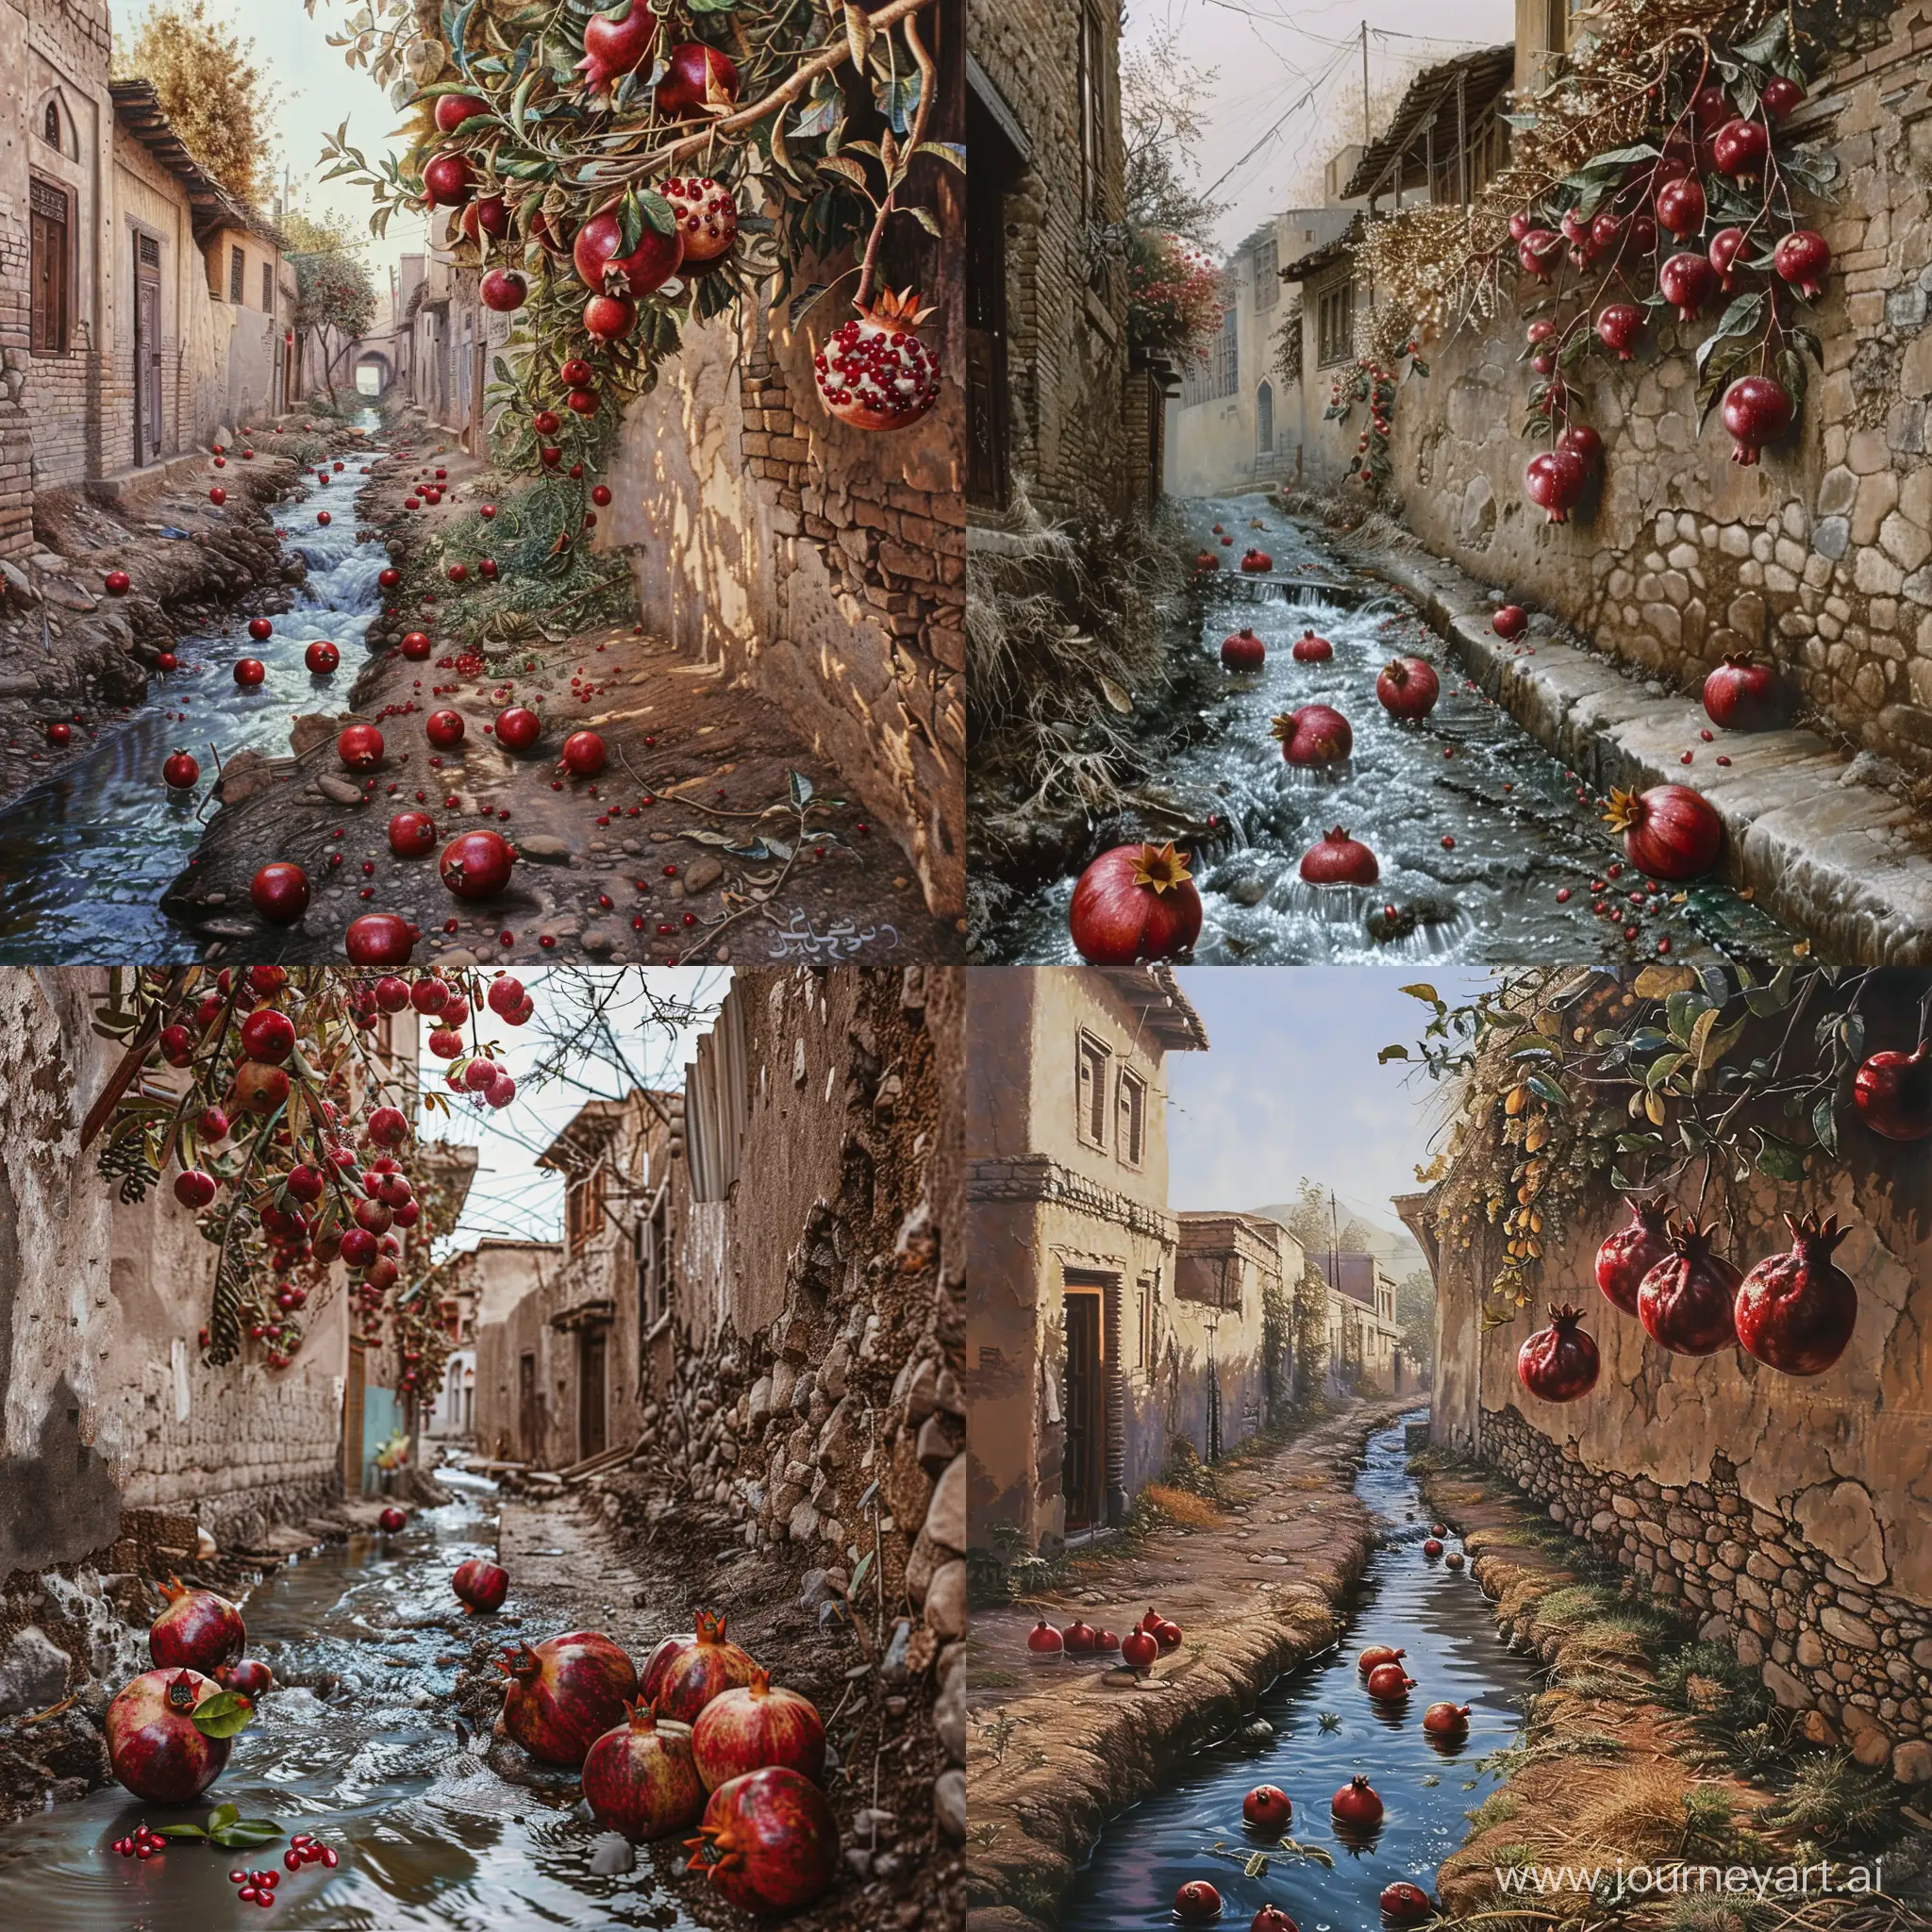 Scenic-Street-in-Old-Iranian-Village-with-Pomegranate-Trees-and-Stream